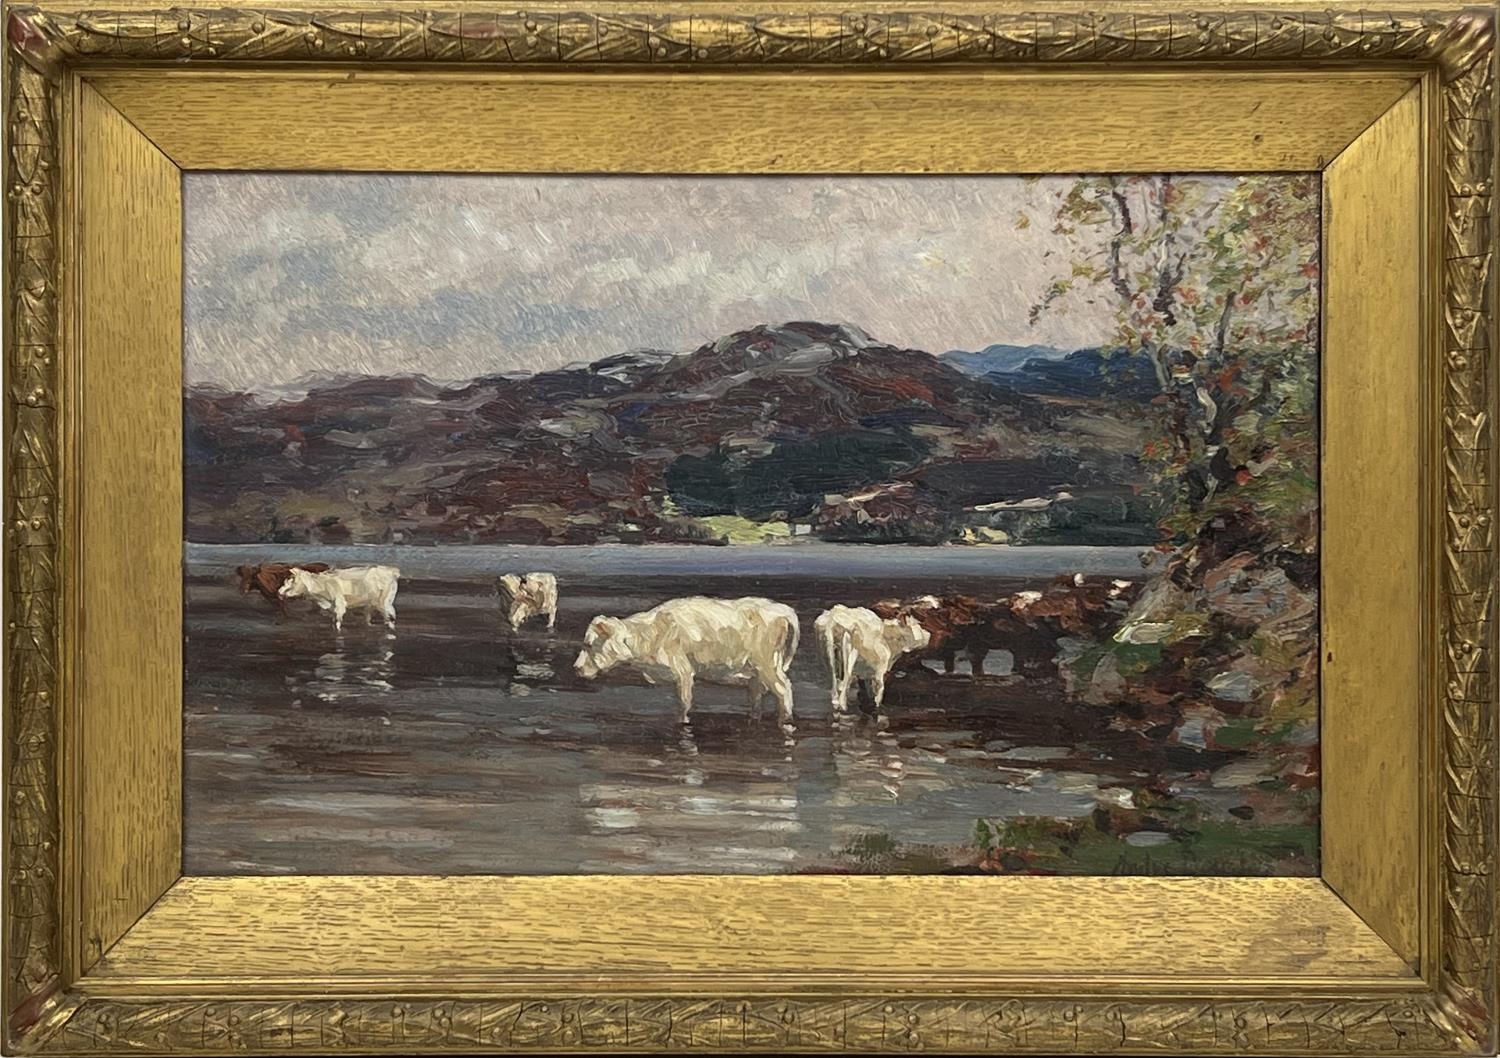 ANDREW DOUGLAS (British 1871-1935) 'Cattle Wandering at a Highland Loch', oil on canvas, 33cm x